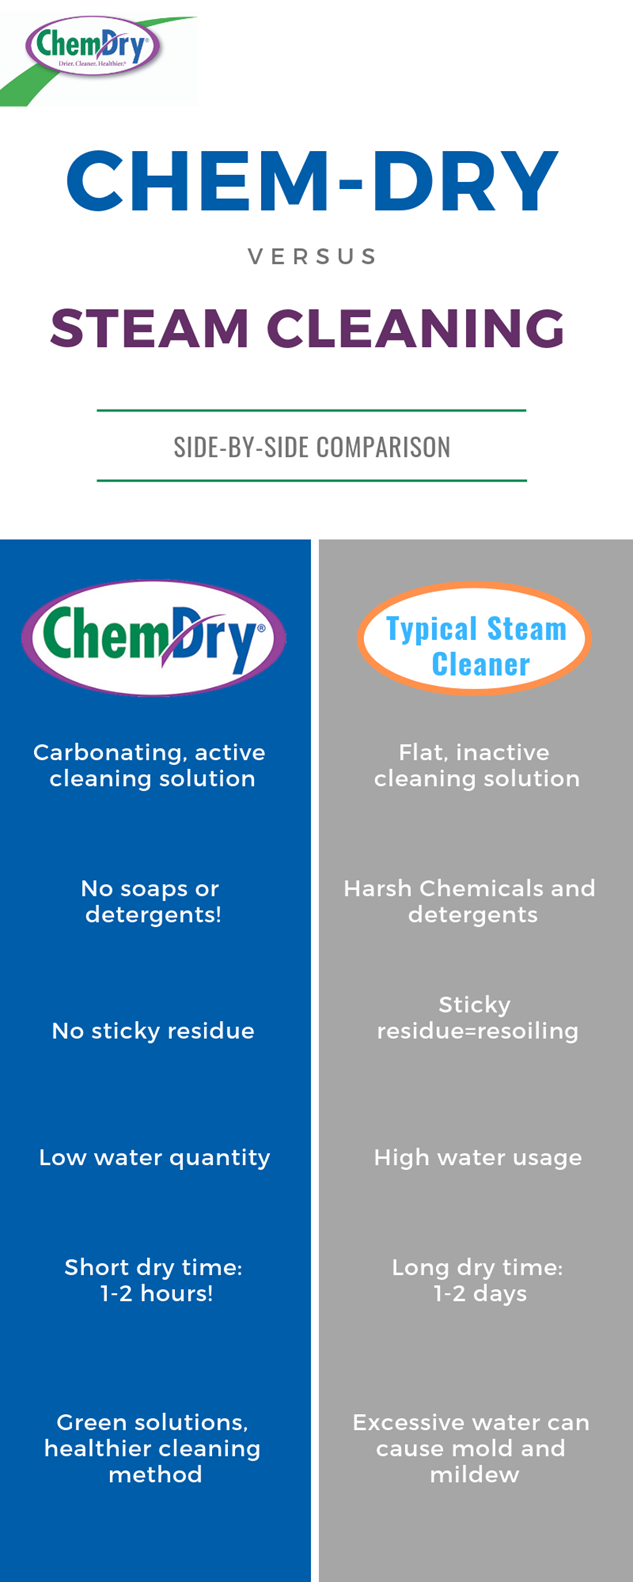 What Is Better Steam Cleaning or Chem Dry?